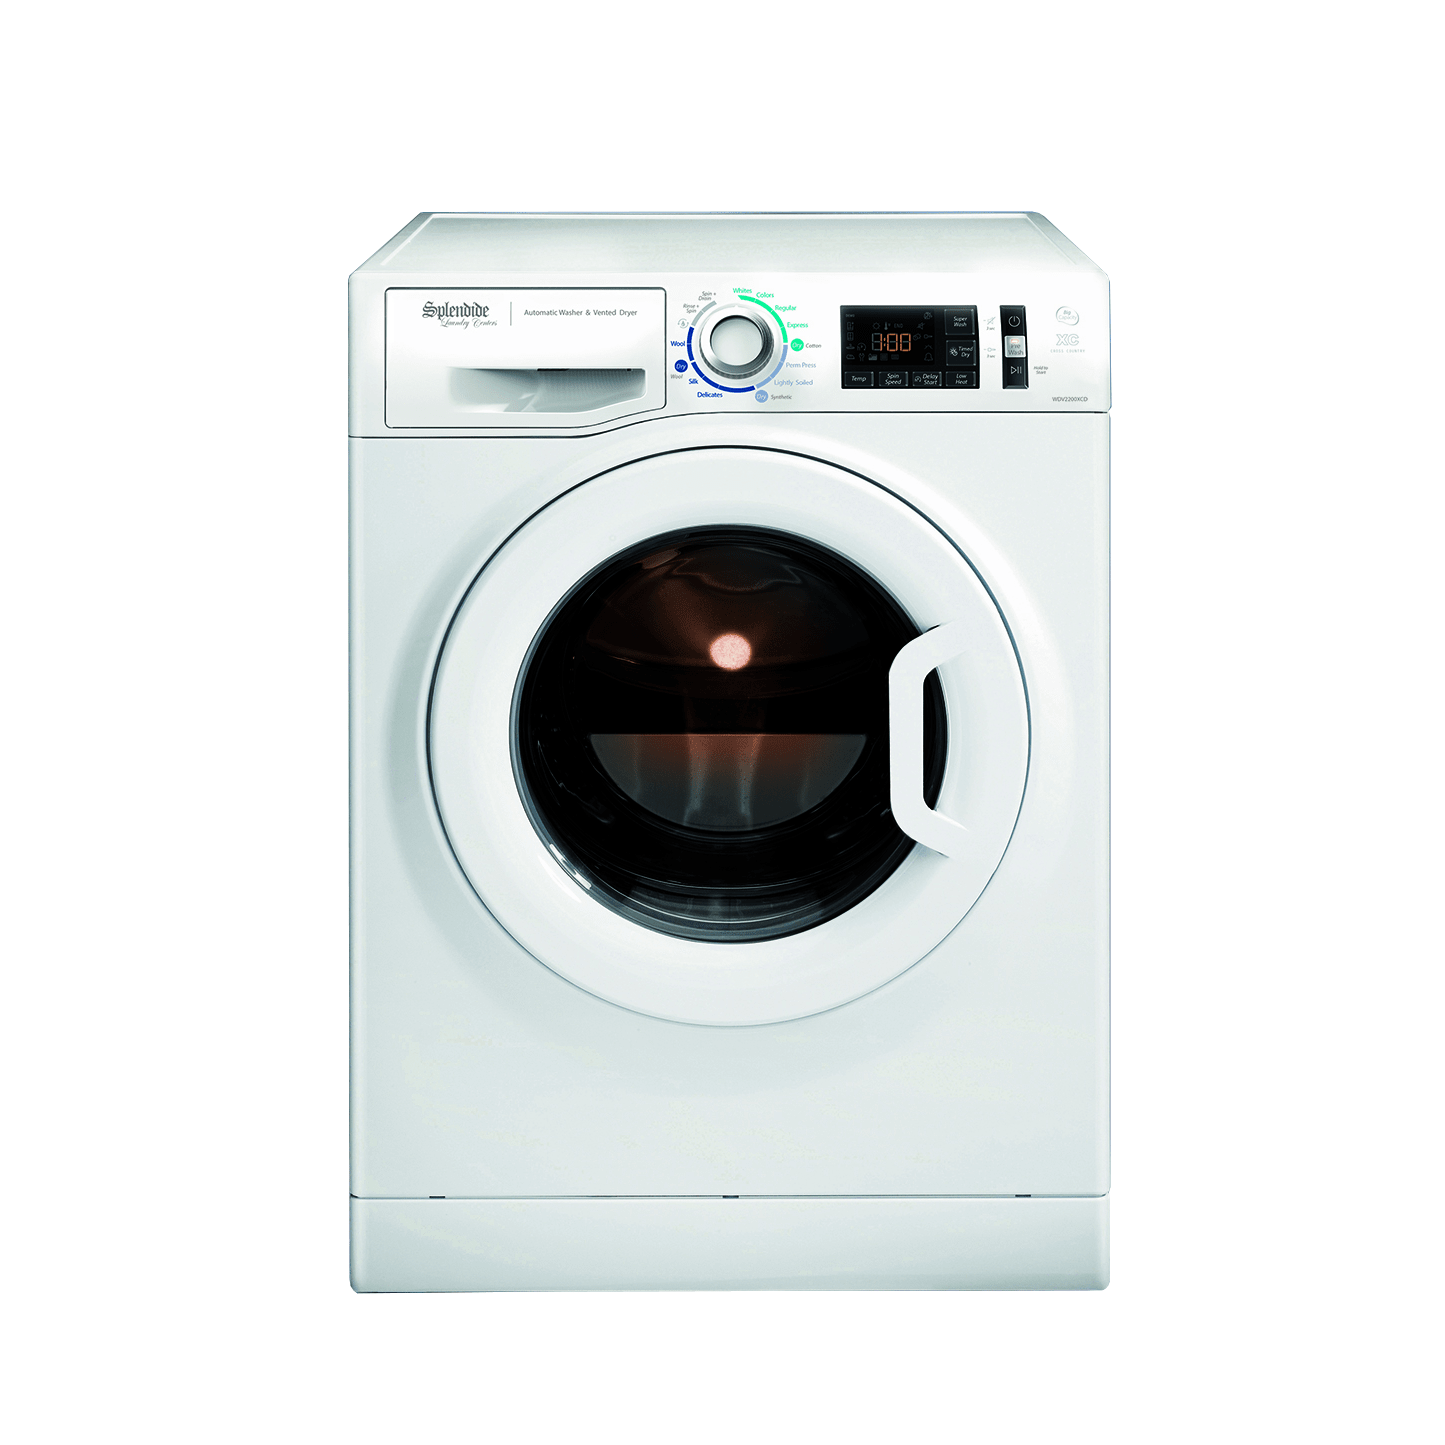 wdv2200xcd of Splendide WDV2200XCD Vented Combo Washer and Dryer